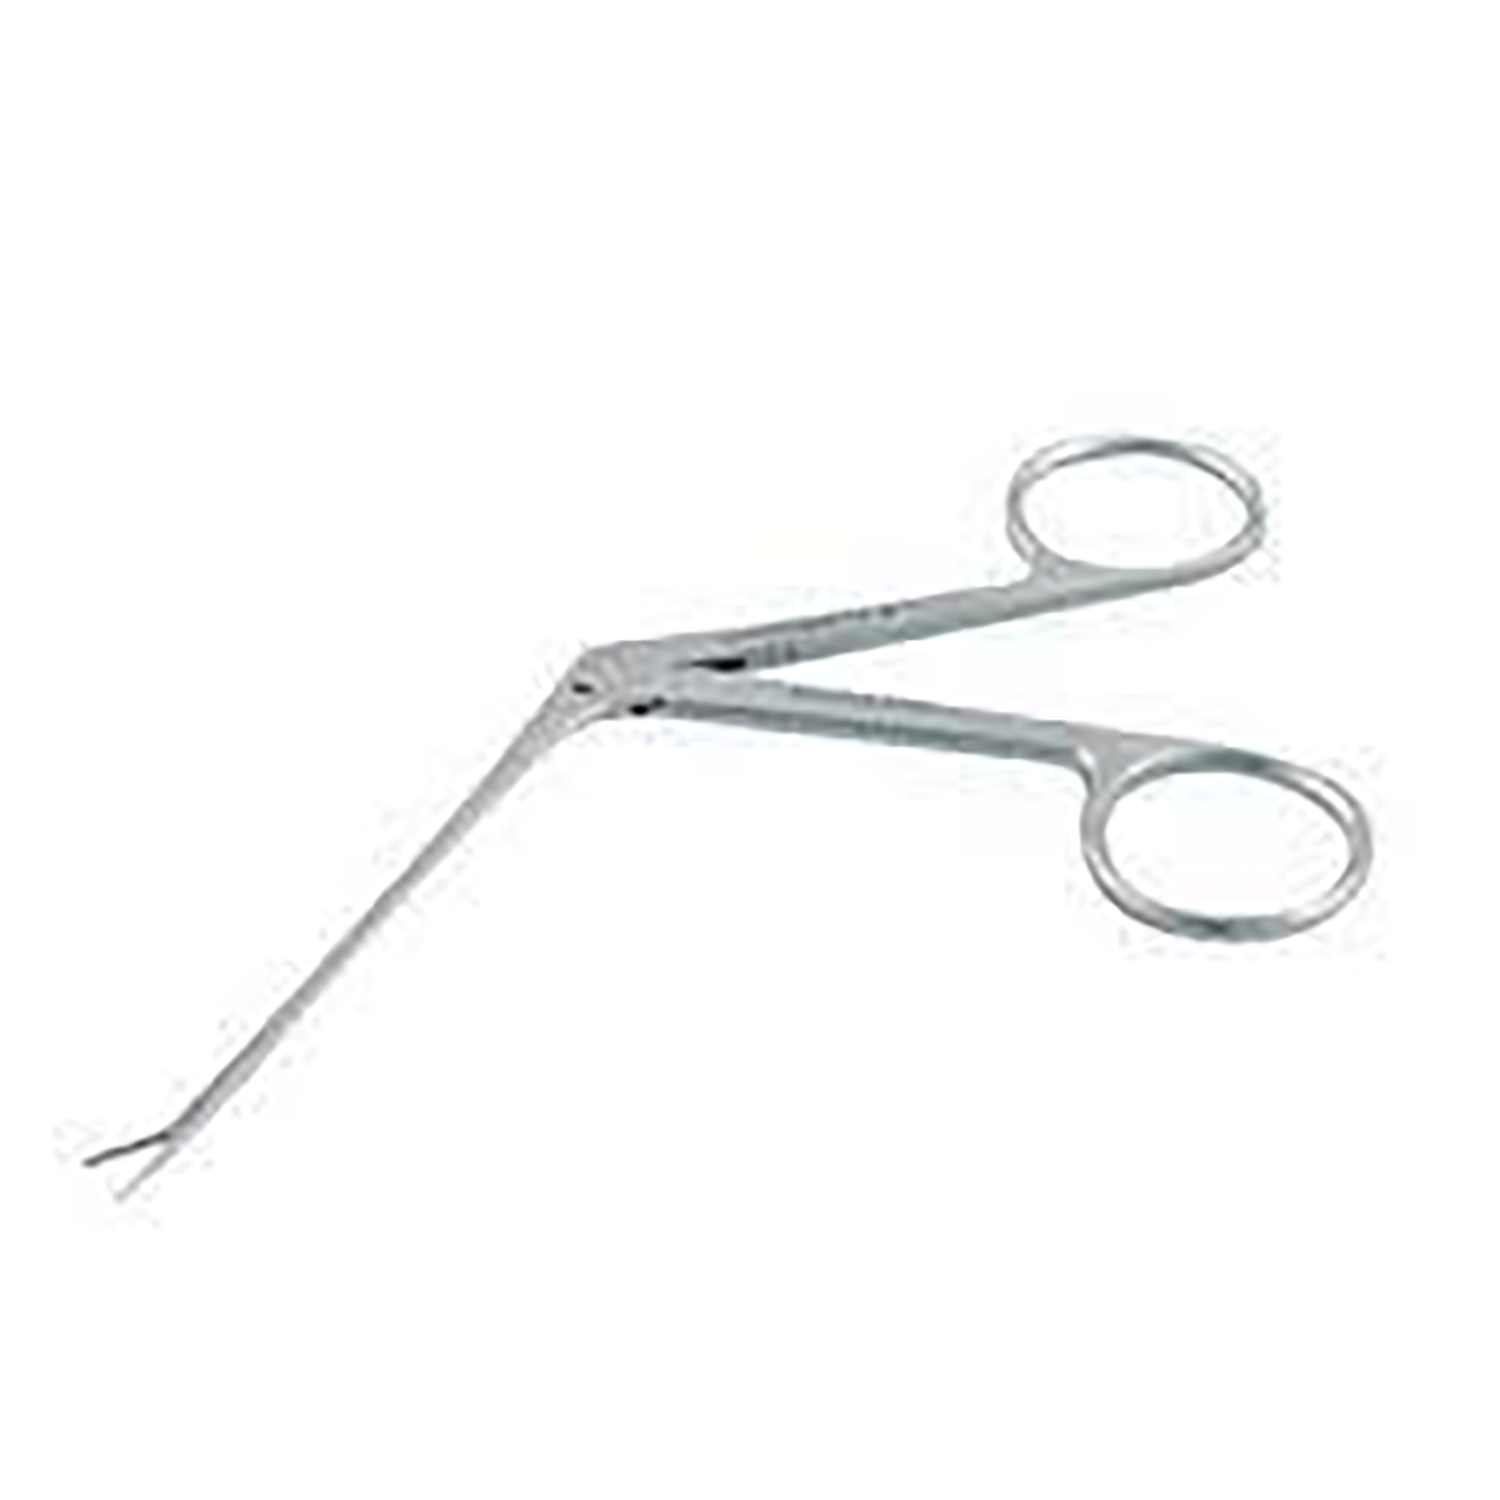 Instrapac Hartman Crocodile Forceps Extra Fine | 14.5cm | Pack of 40